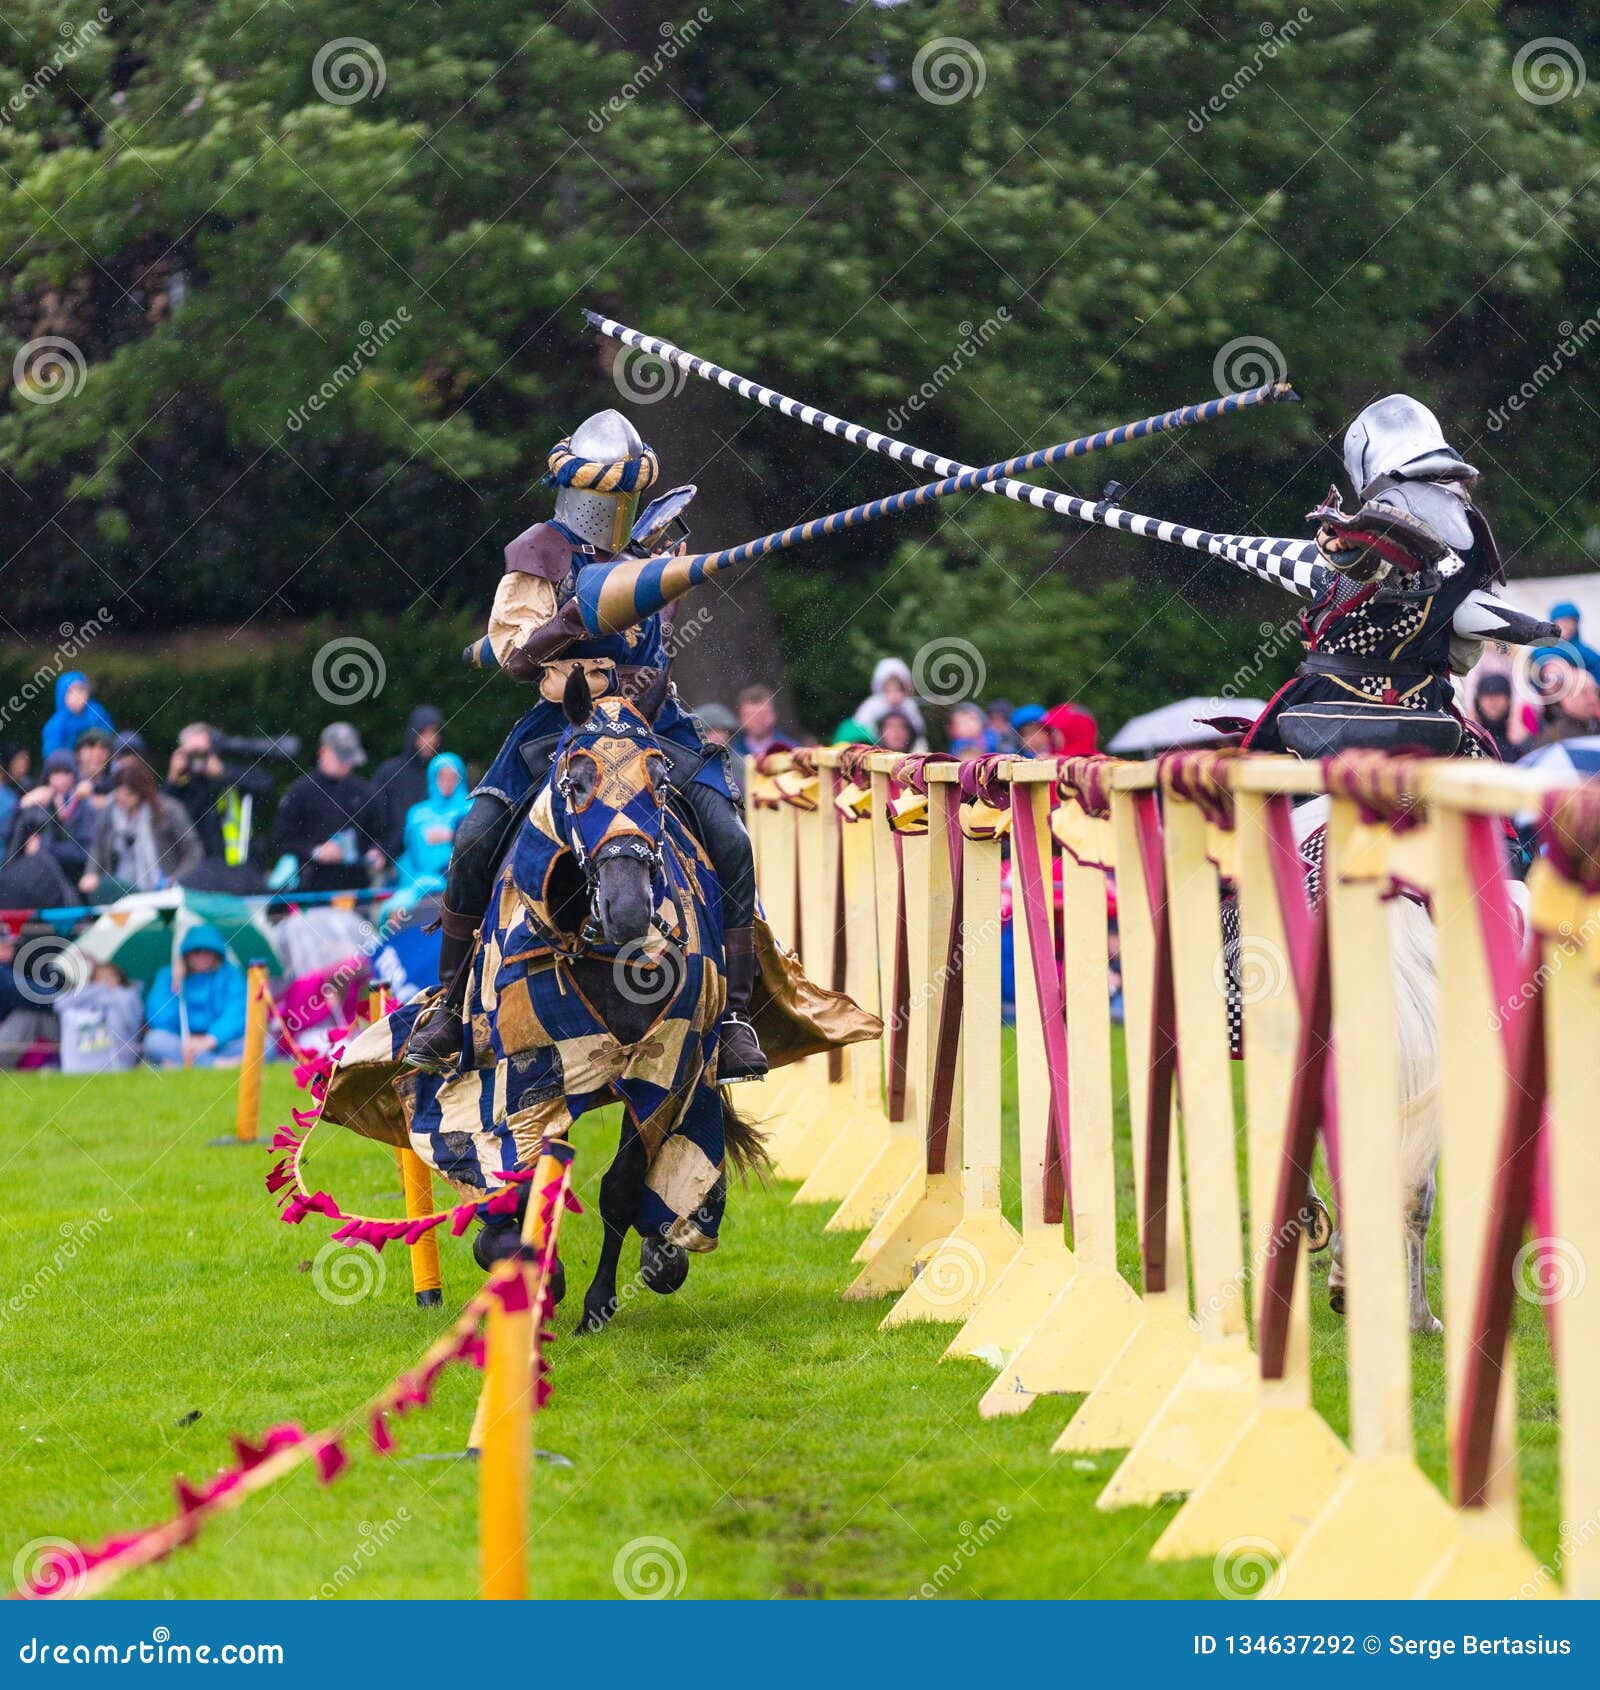 Annual Medieval Jousting Tournament at Linlithgow Palace, Scotland